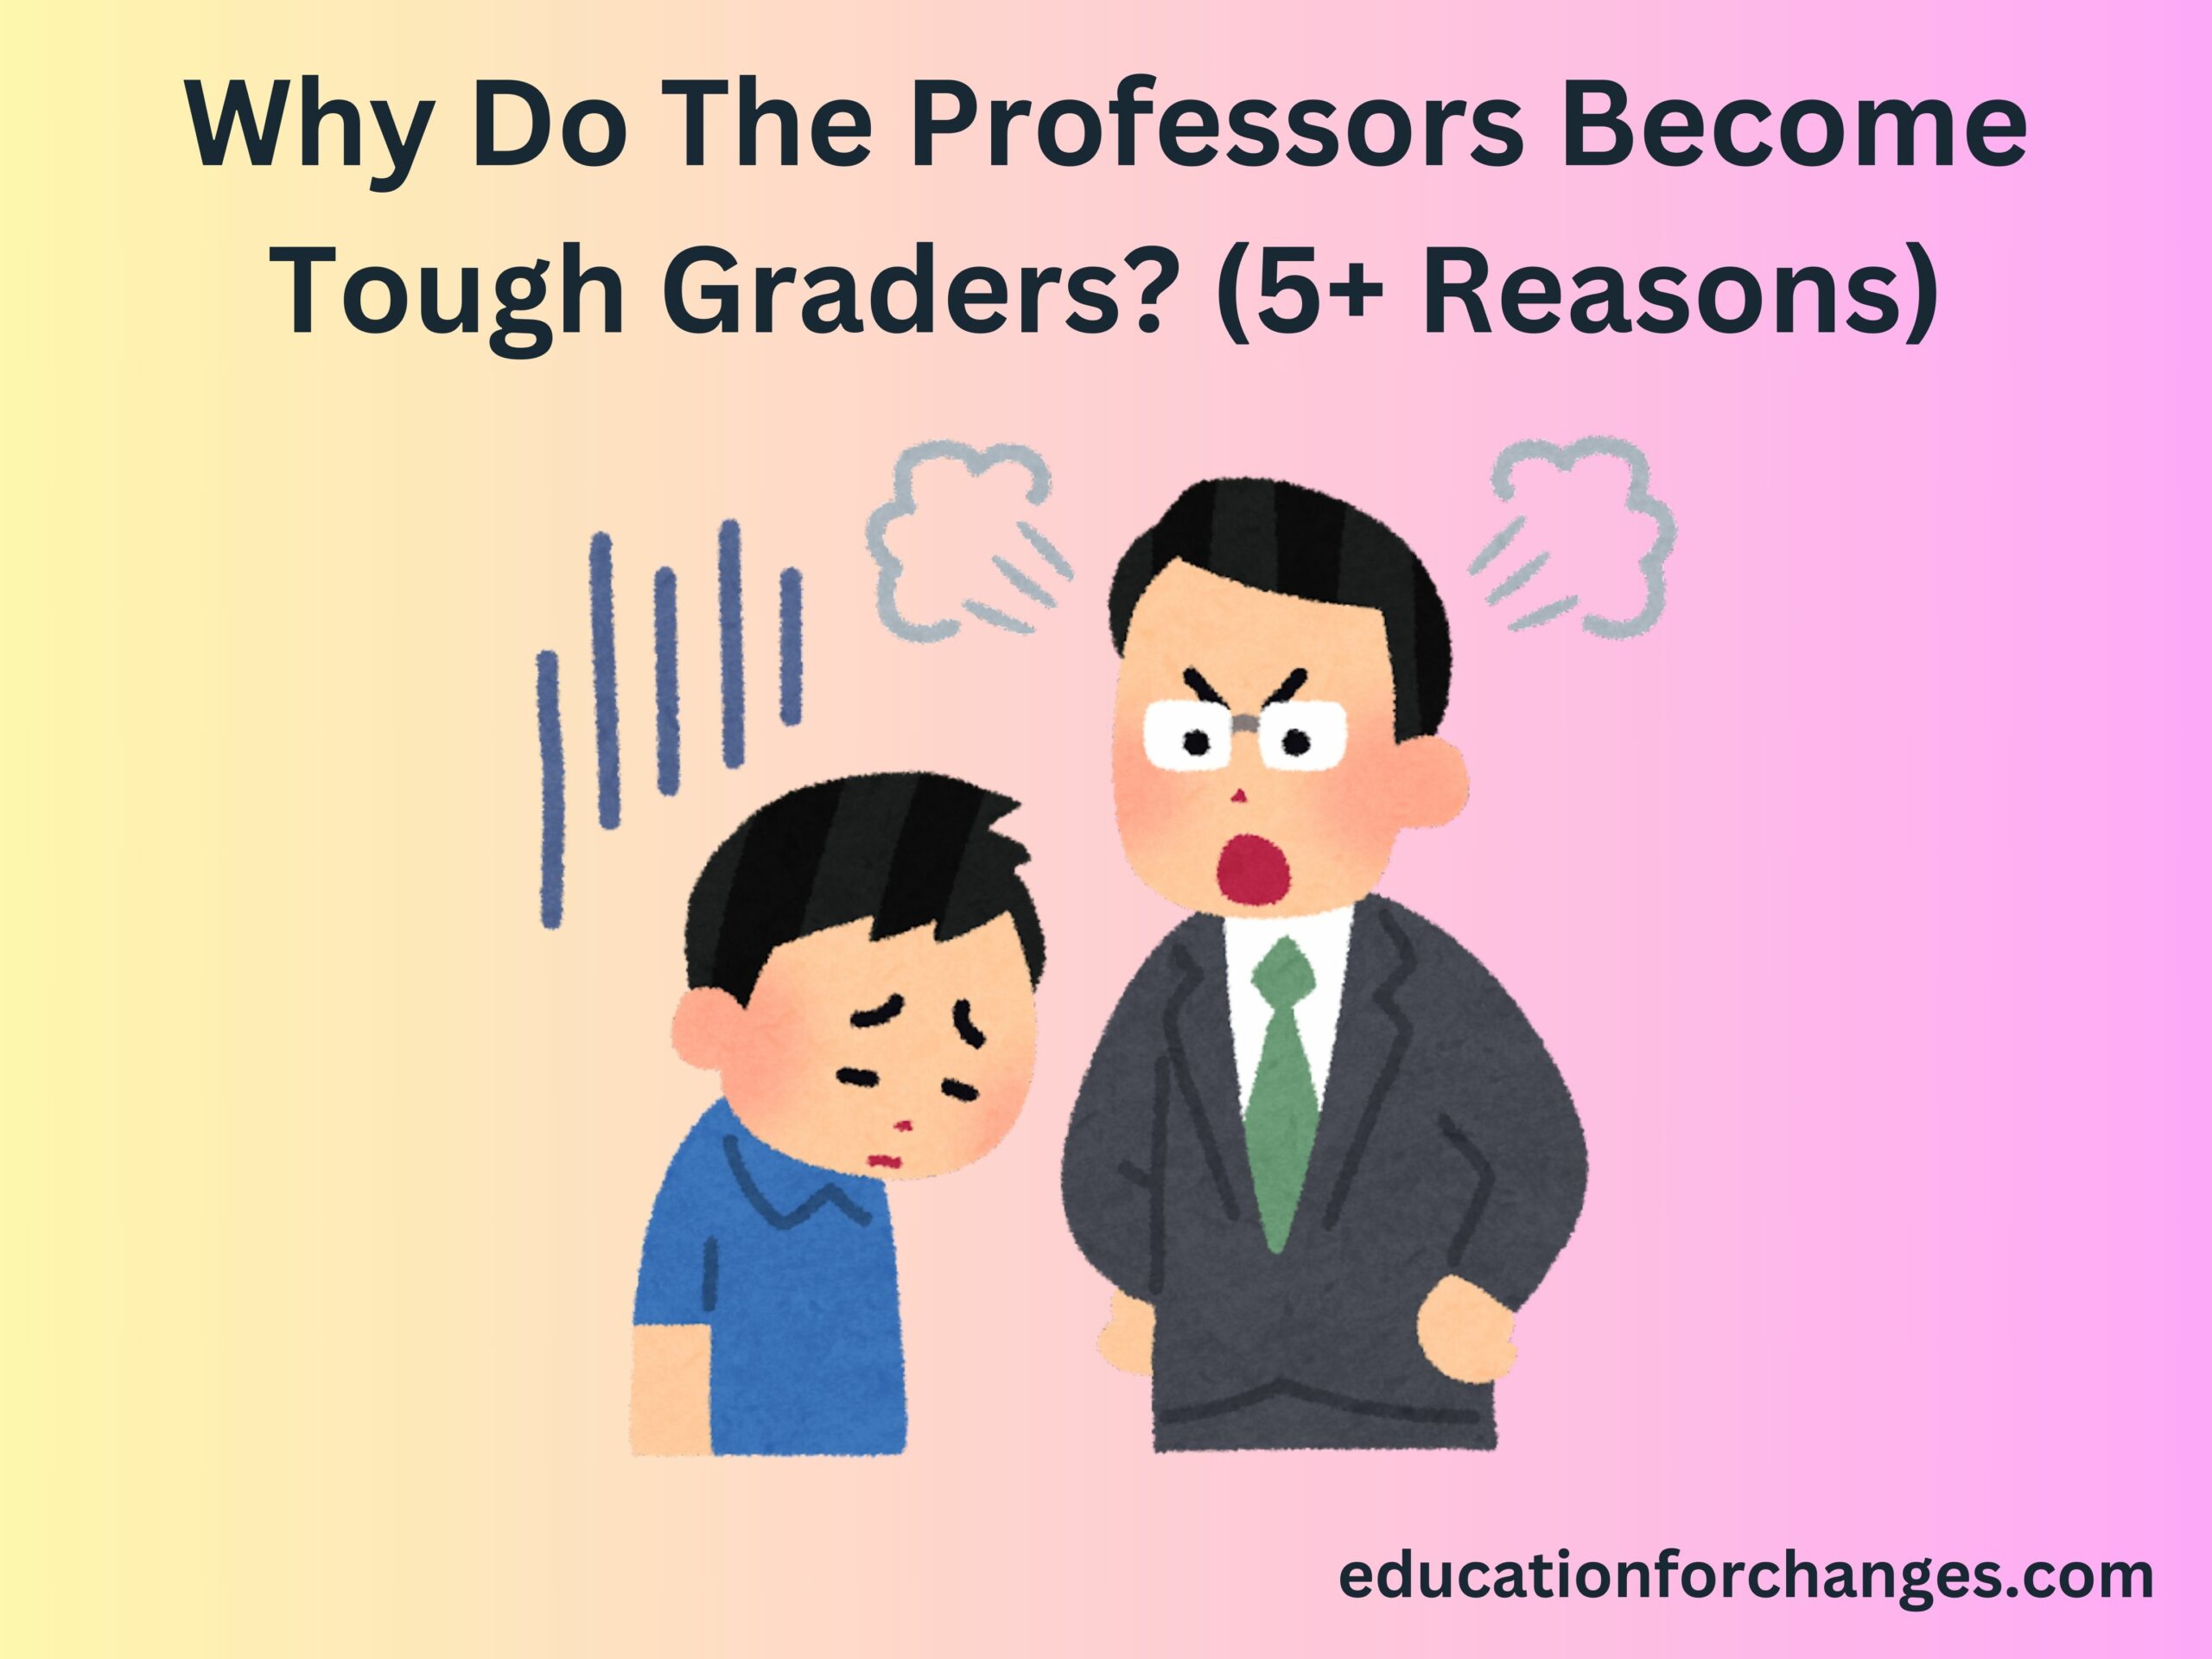 Why Do The Professors Become Tough Graders (5+ Reasons)